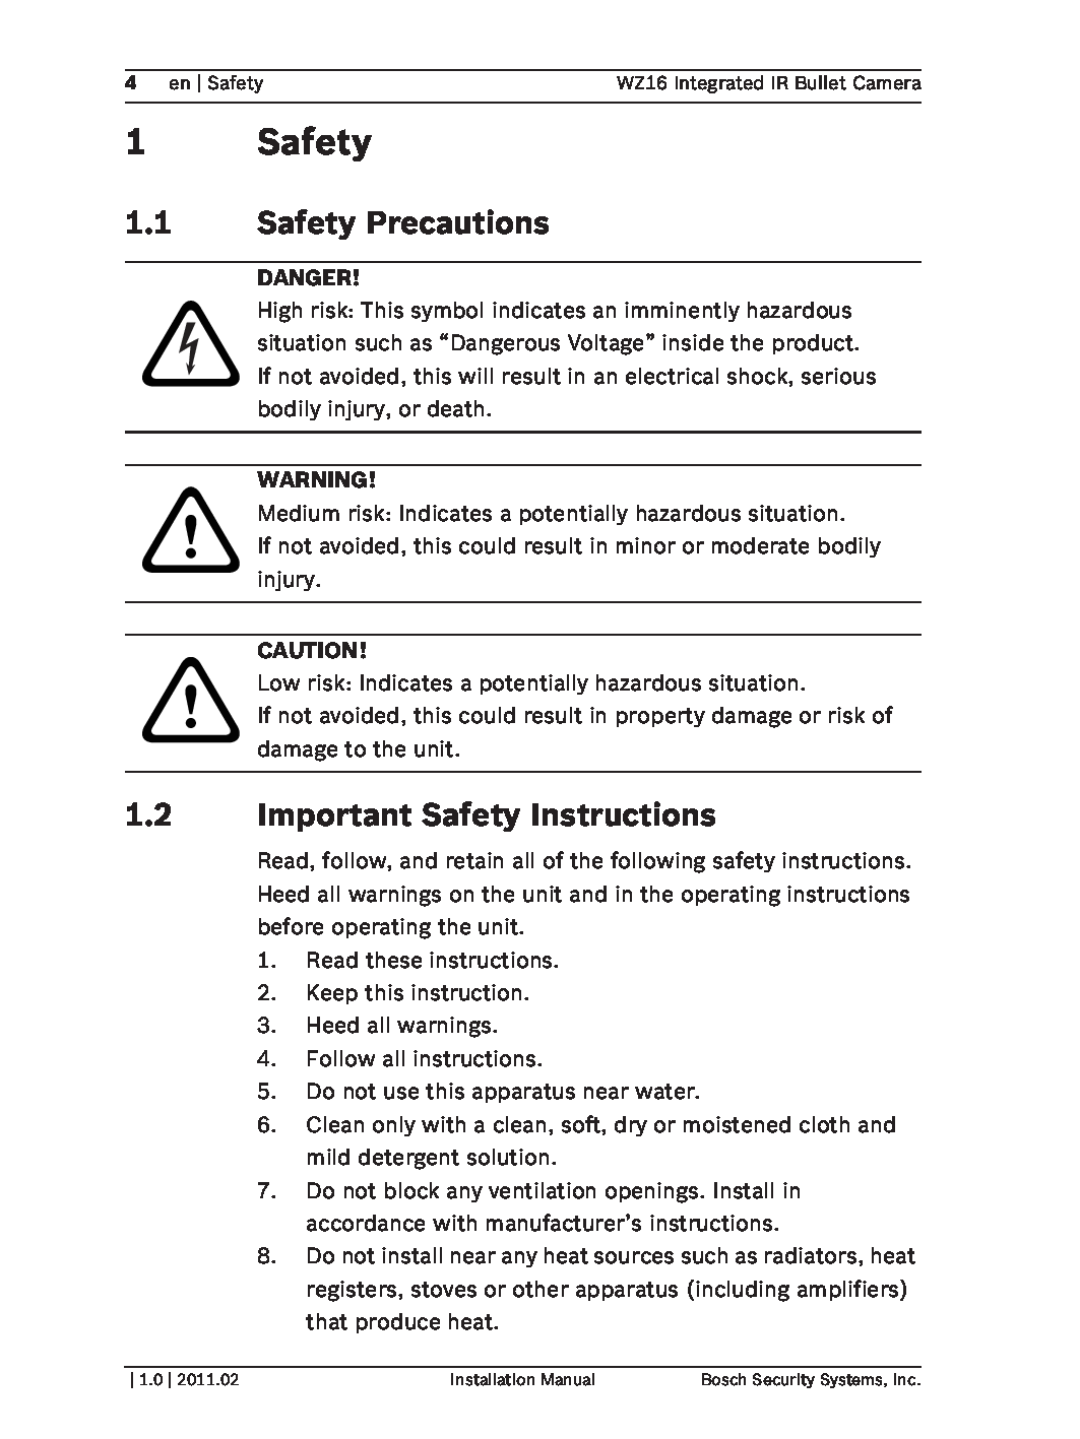 Bosch Appliances WZ16 installation manual 1.1Safety Precautions, 1.2Important Safety Instructions 